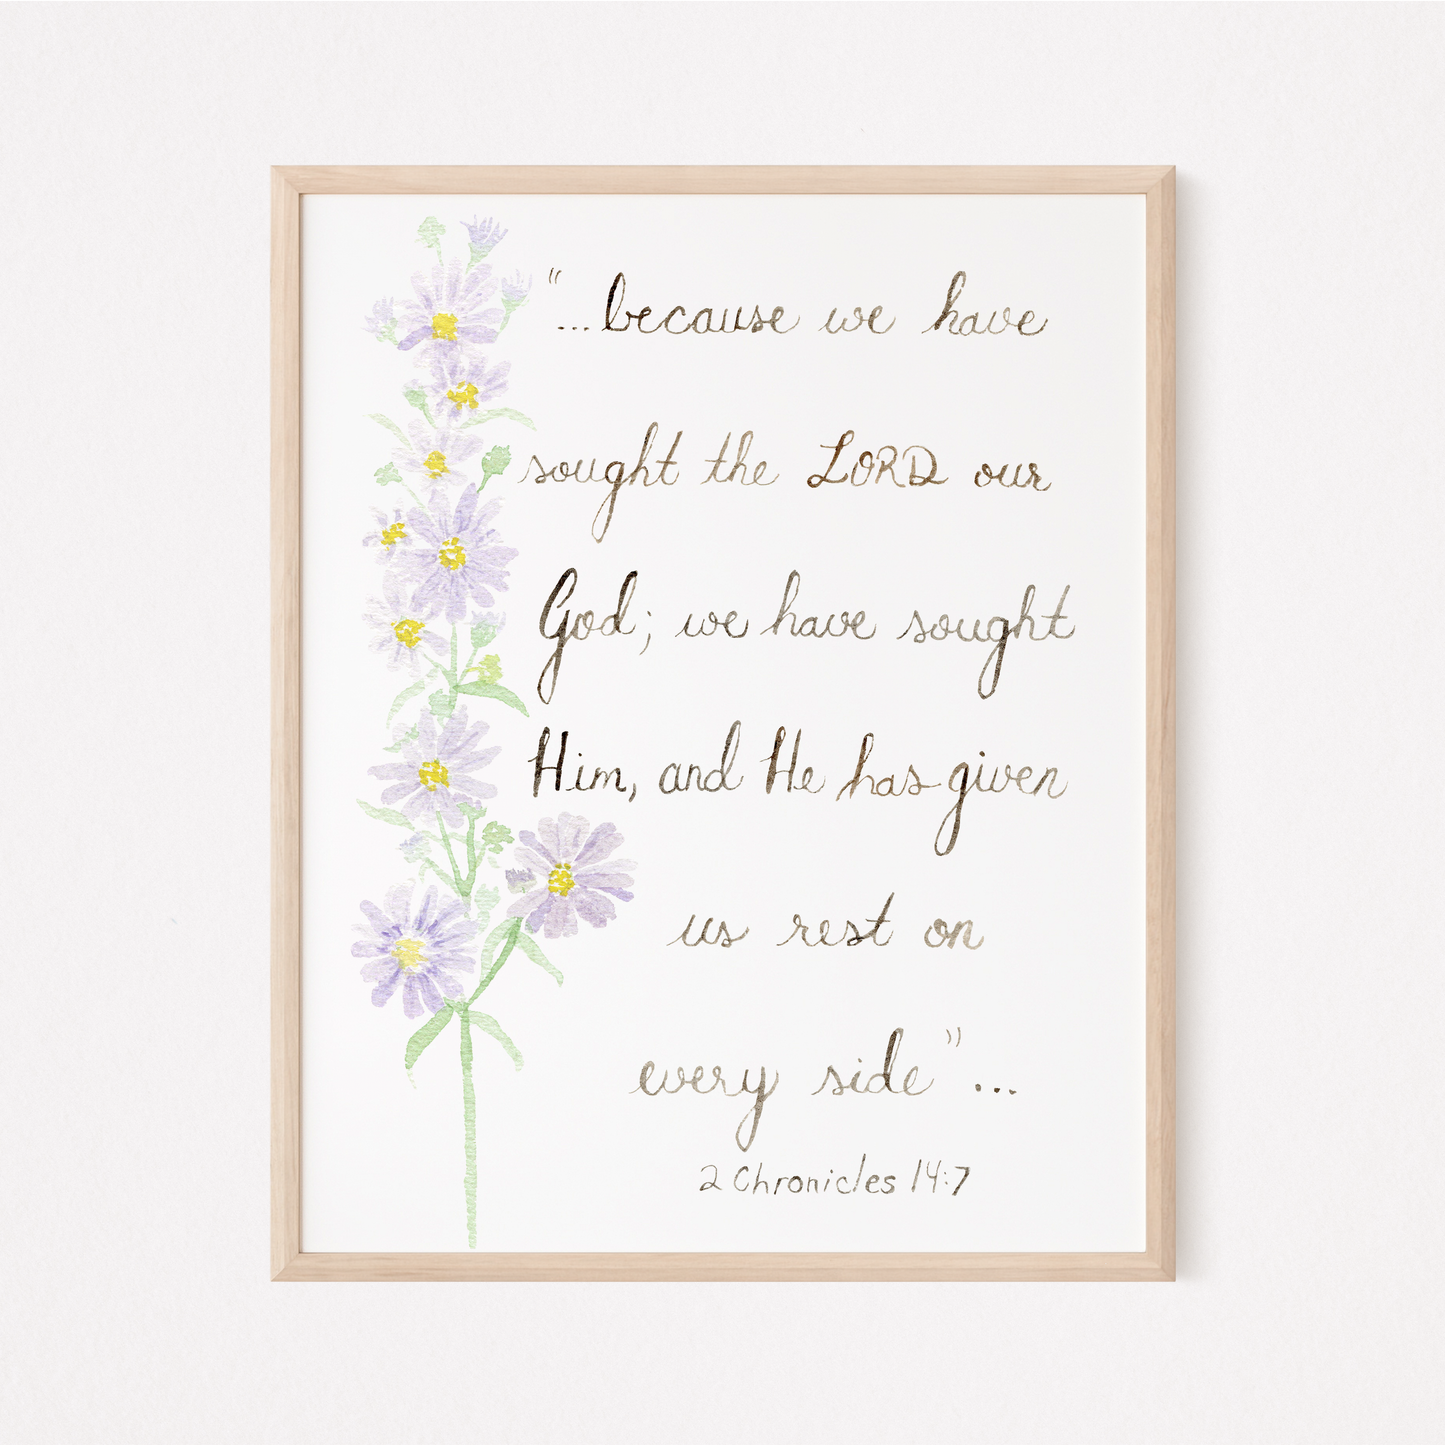 2 Chronicles 14:7 Downloadable Print